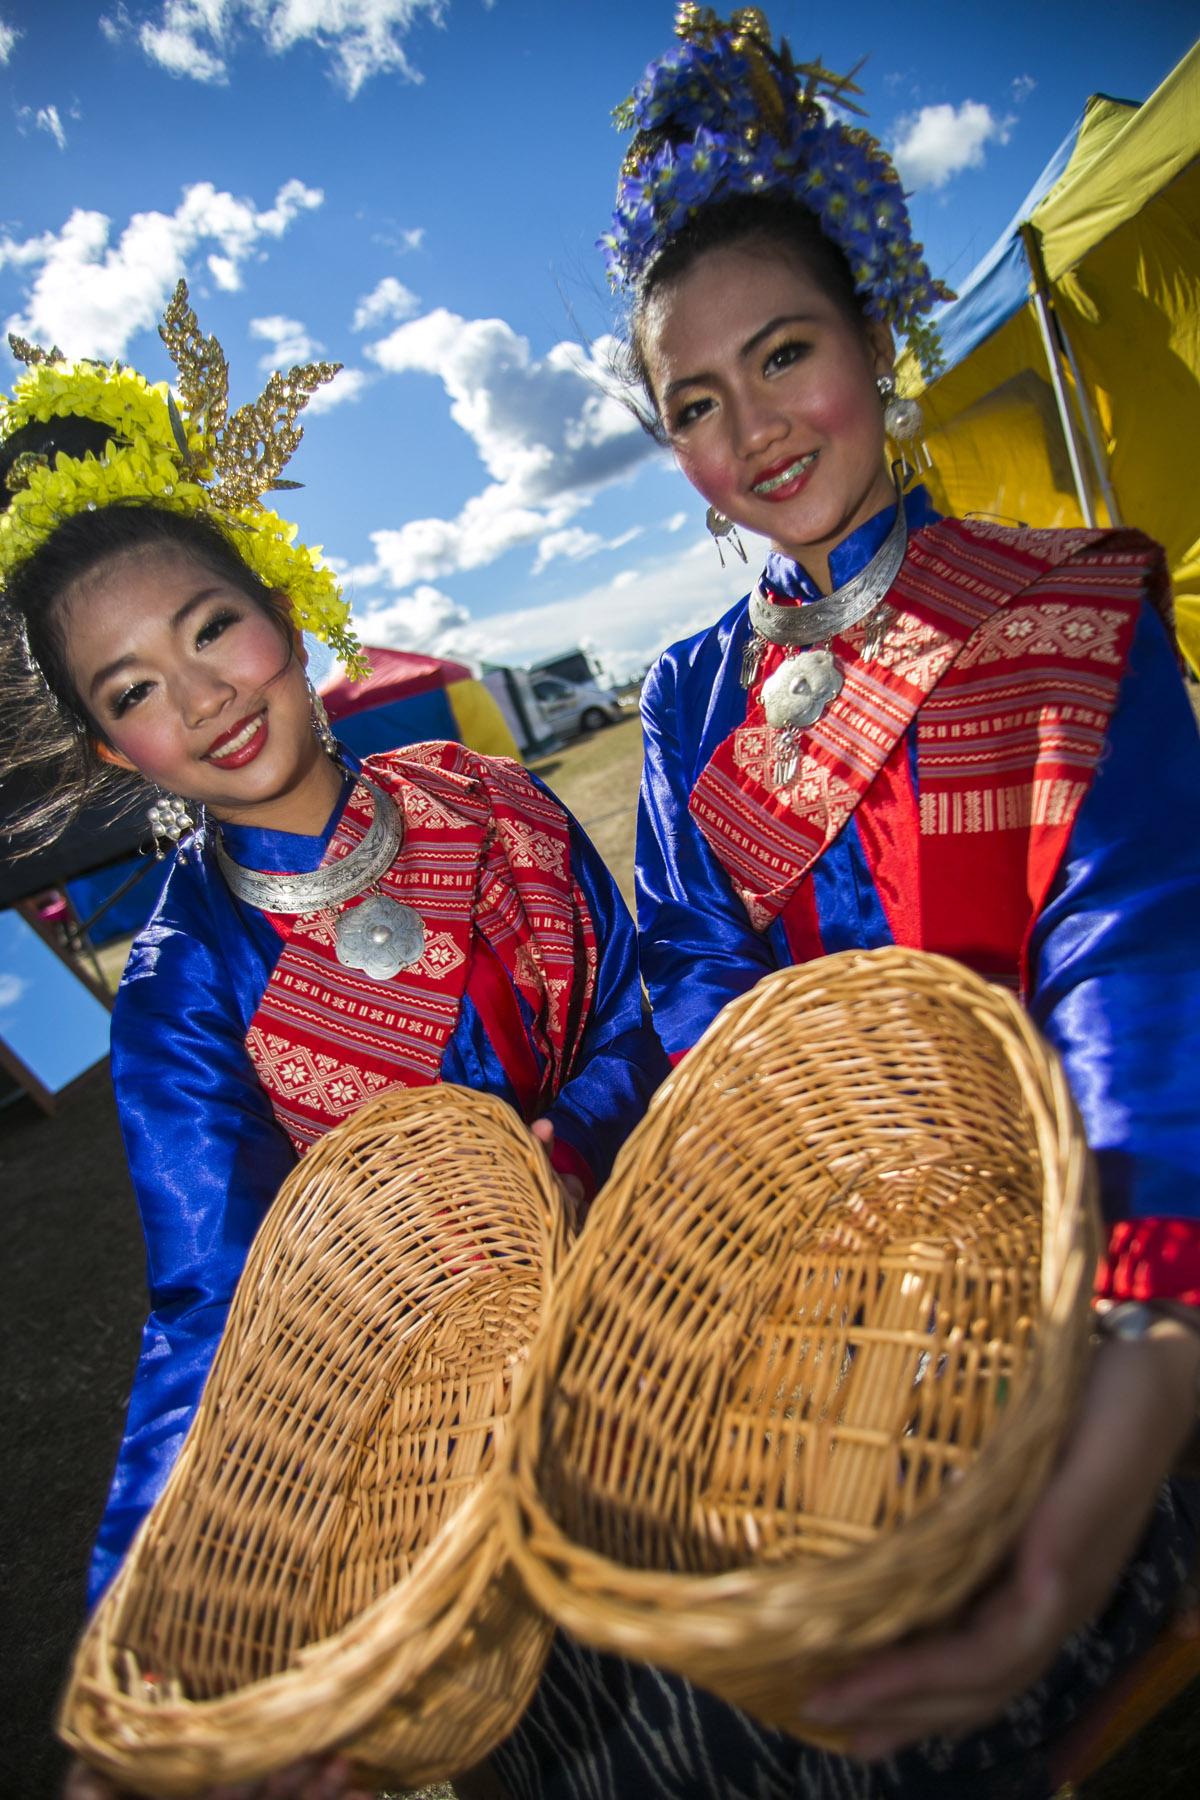 All our pictures from the Poole Thai Festival 2013